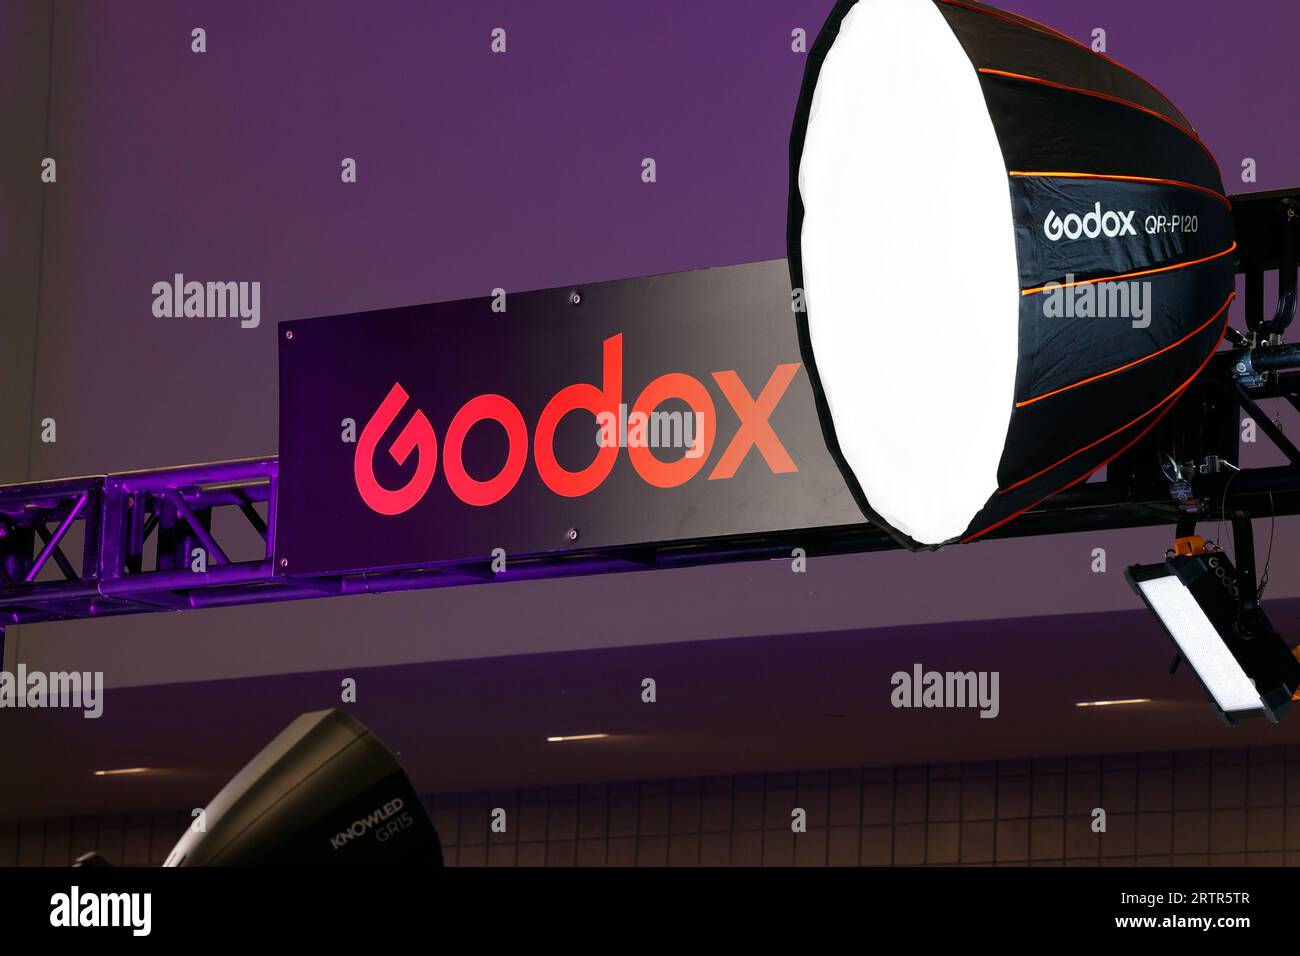 Signage for Godox photographic studio lighting equipment at a trade show exhibition. Stock Photo